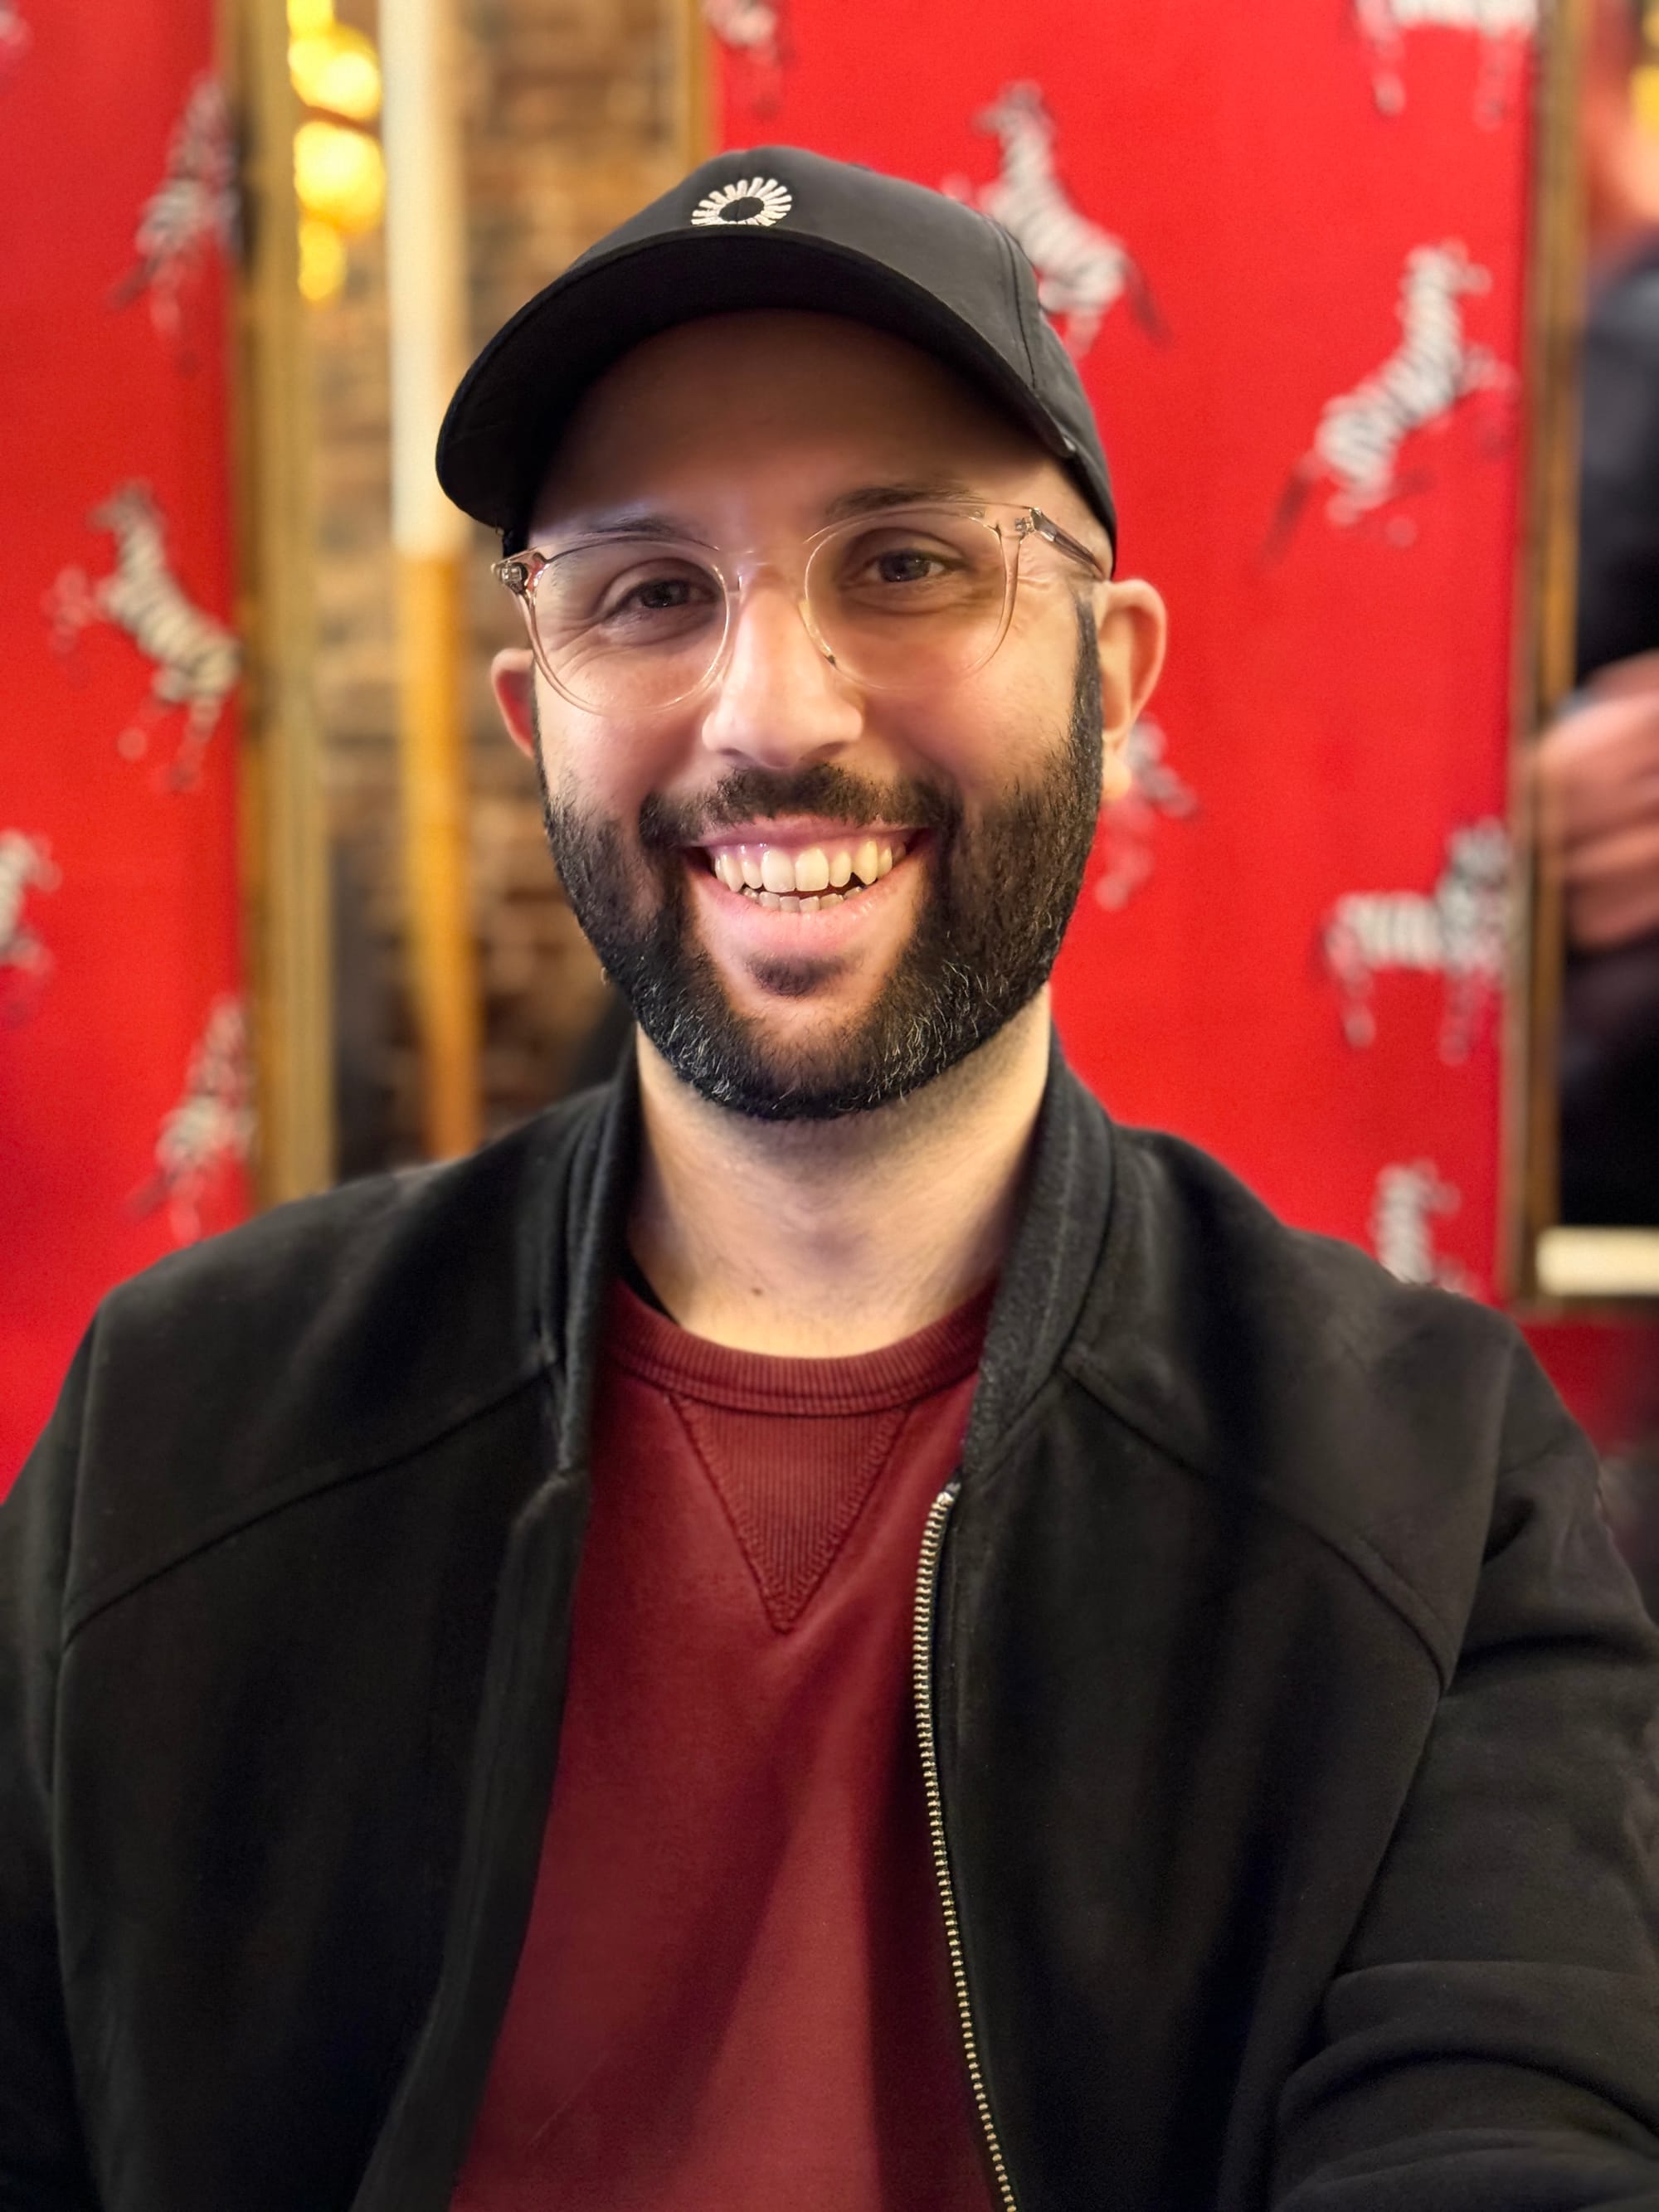 portrait photo of me, a smiling bearded white man in a red sweater, a black bomber jacket, and a black baseball cap